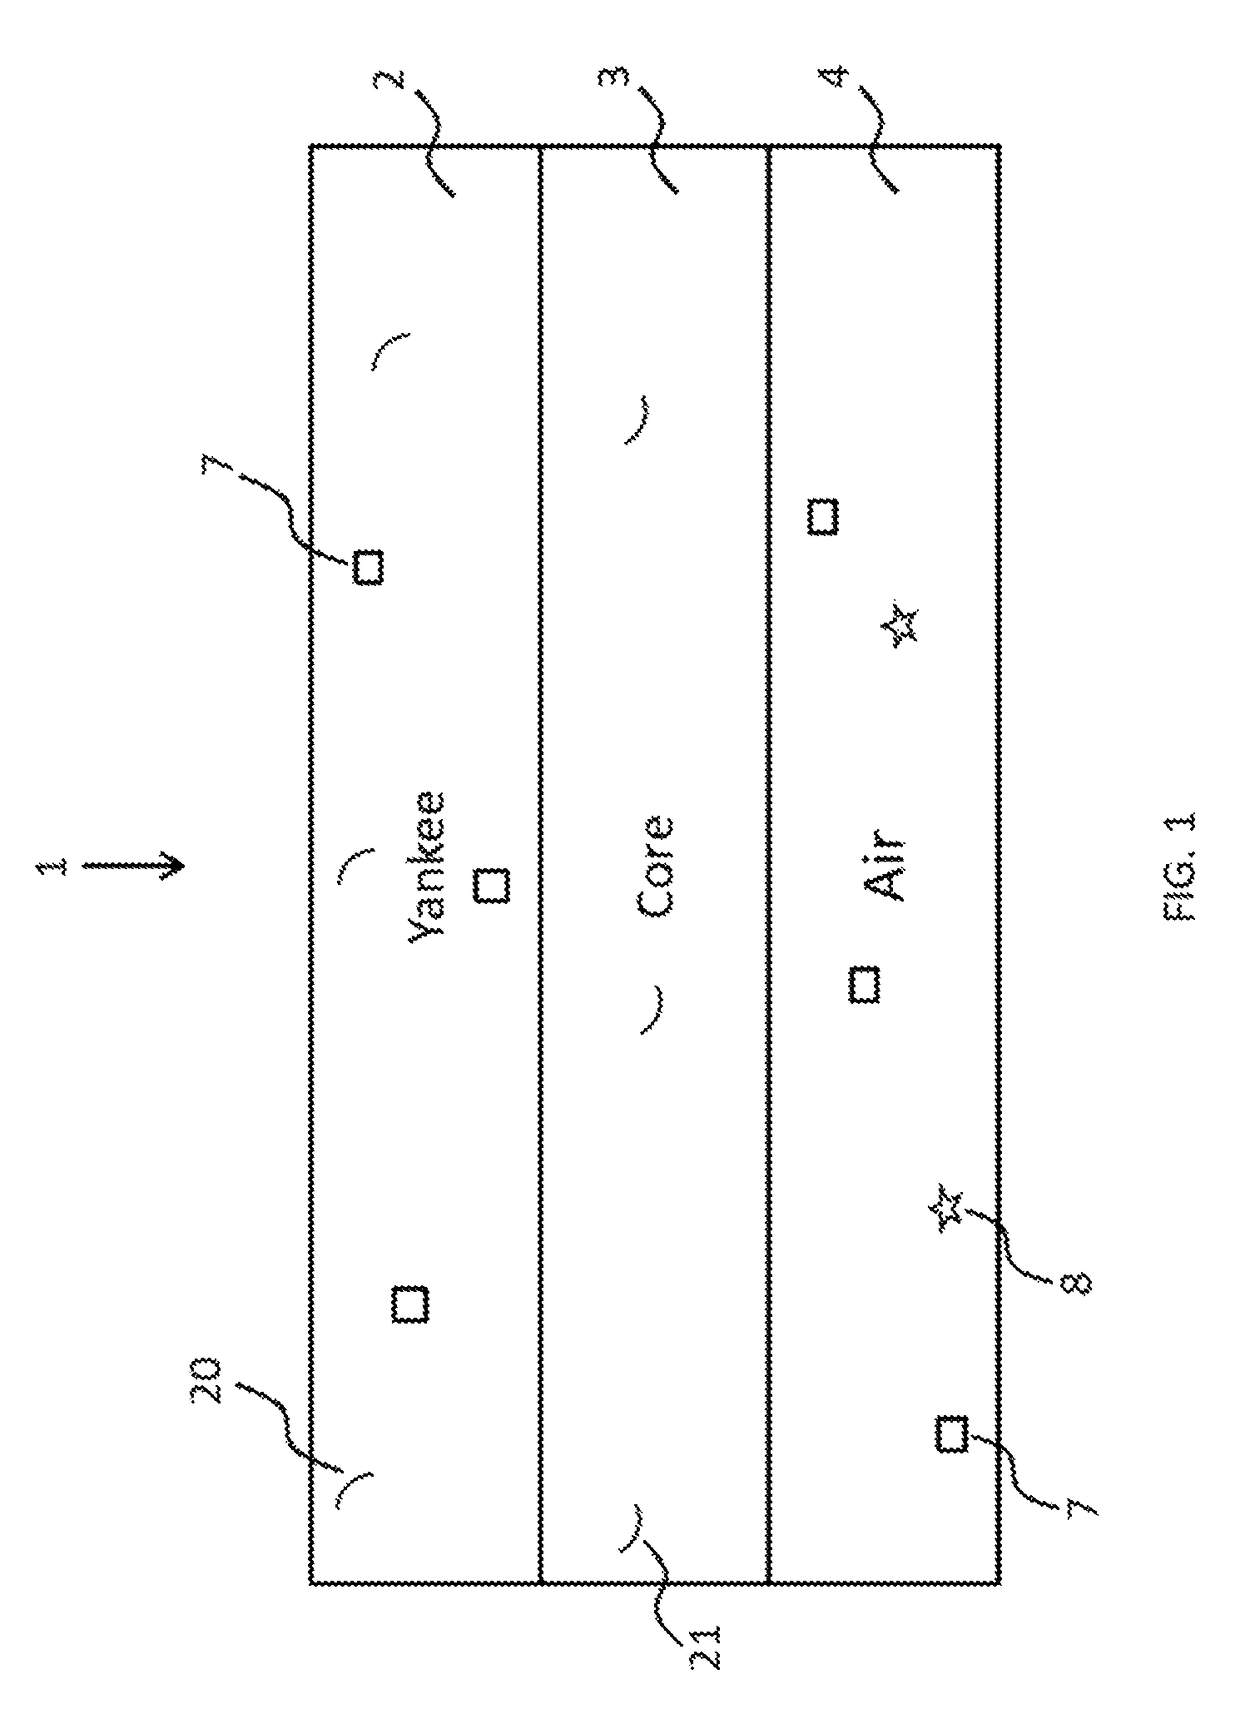 Towel with quality wet scrubbing properties at relatively low basis weight and an apparatus and method for producing same